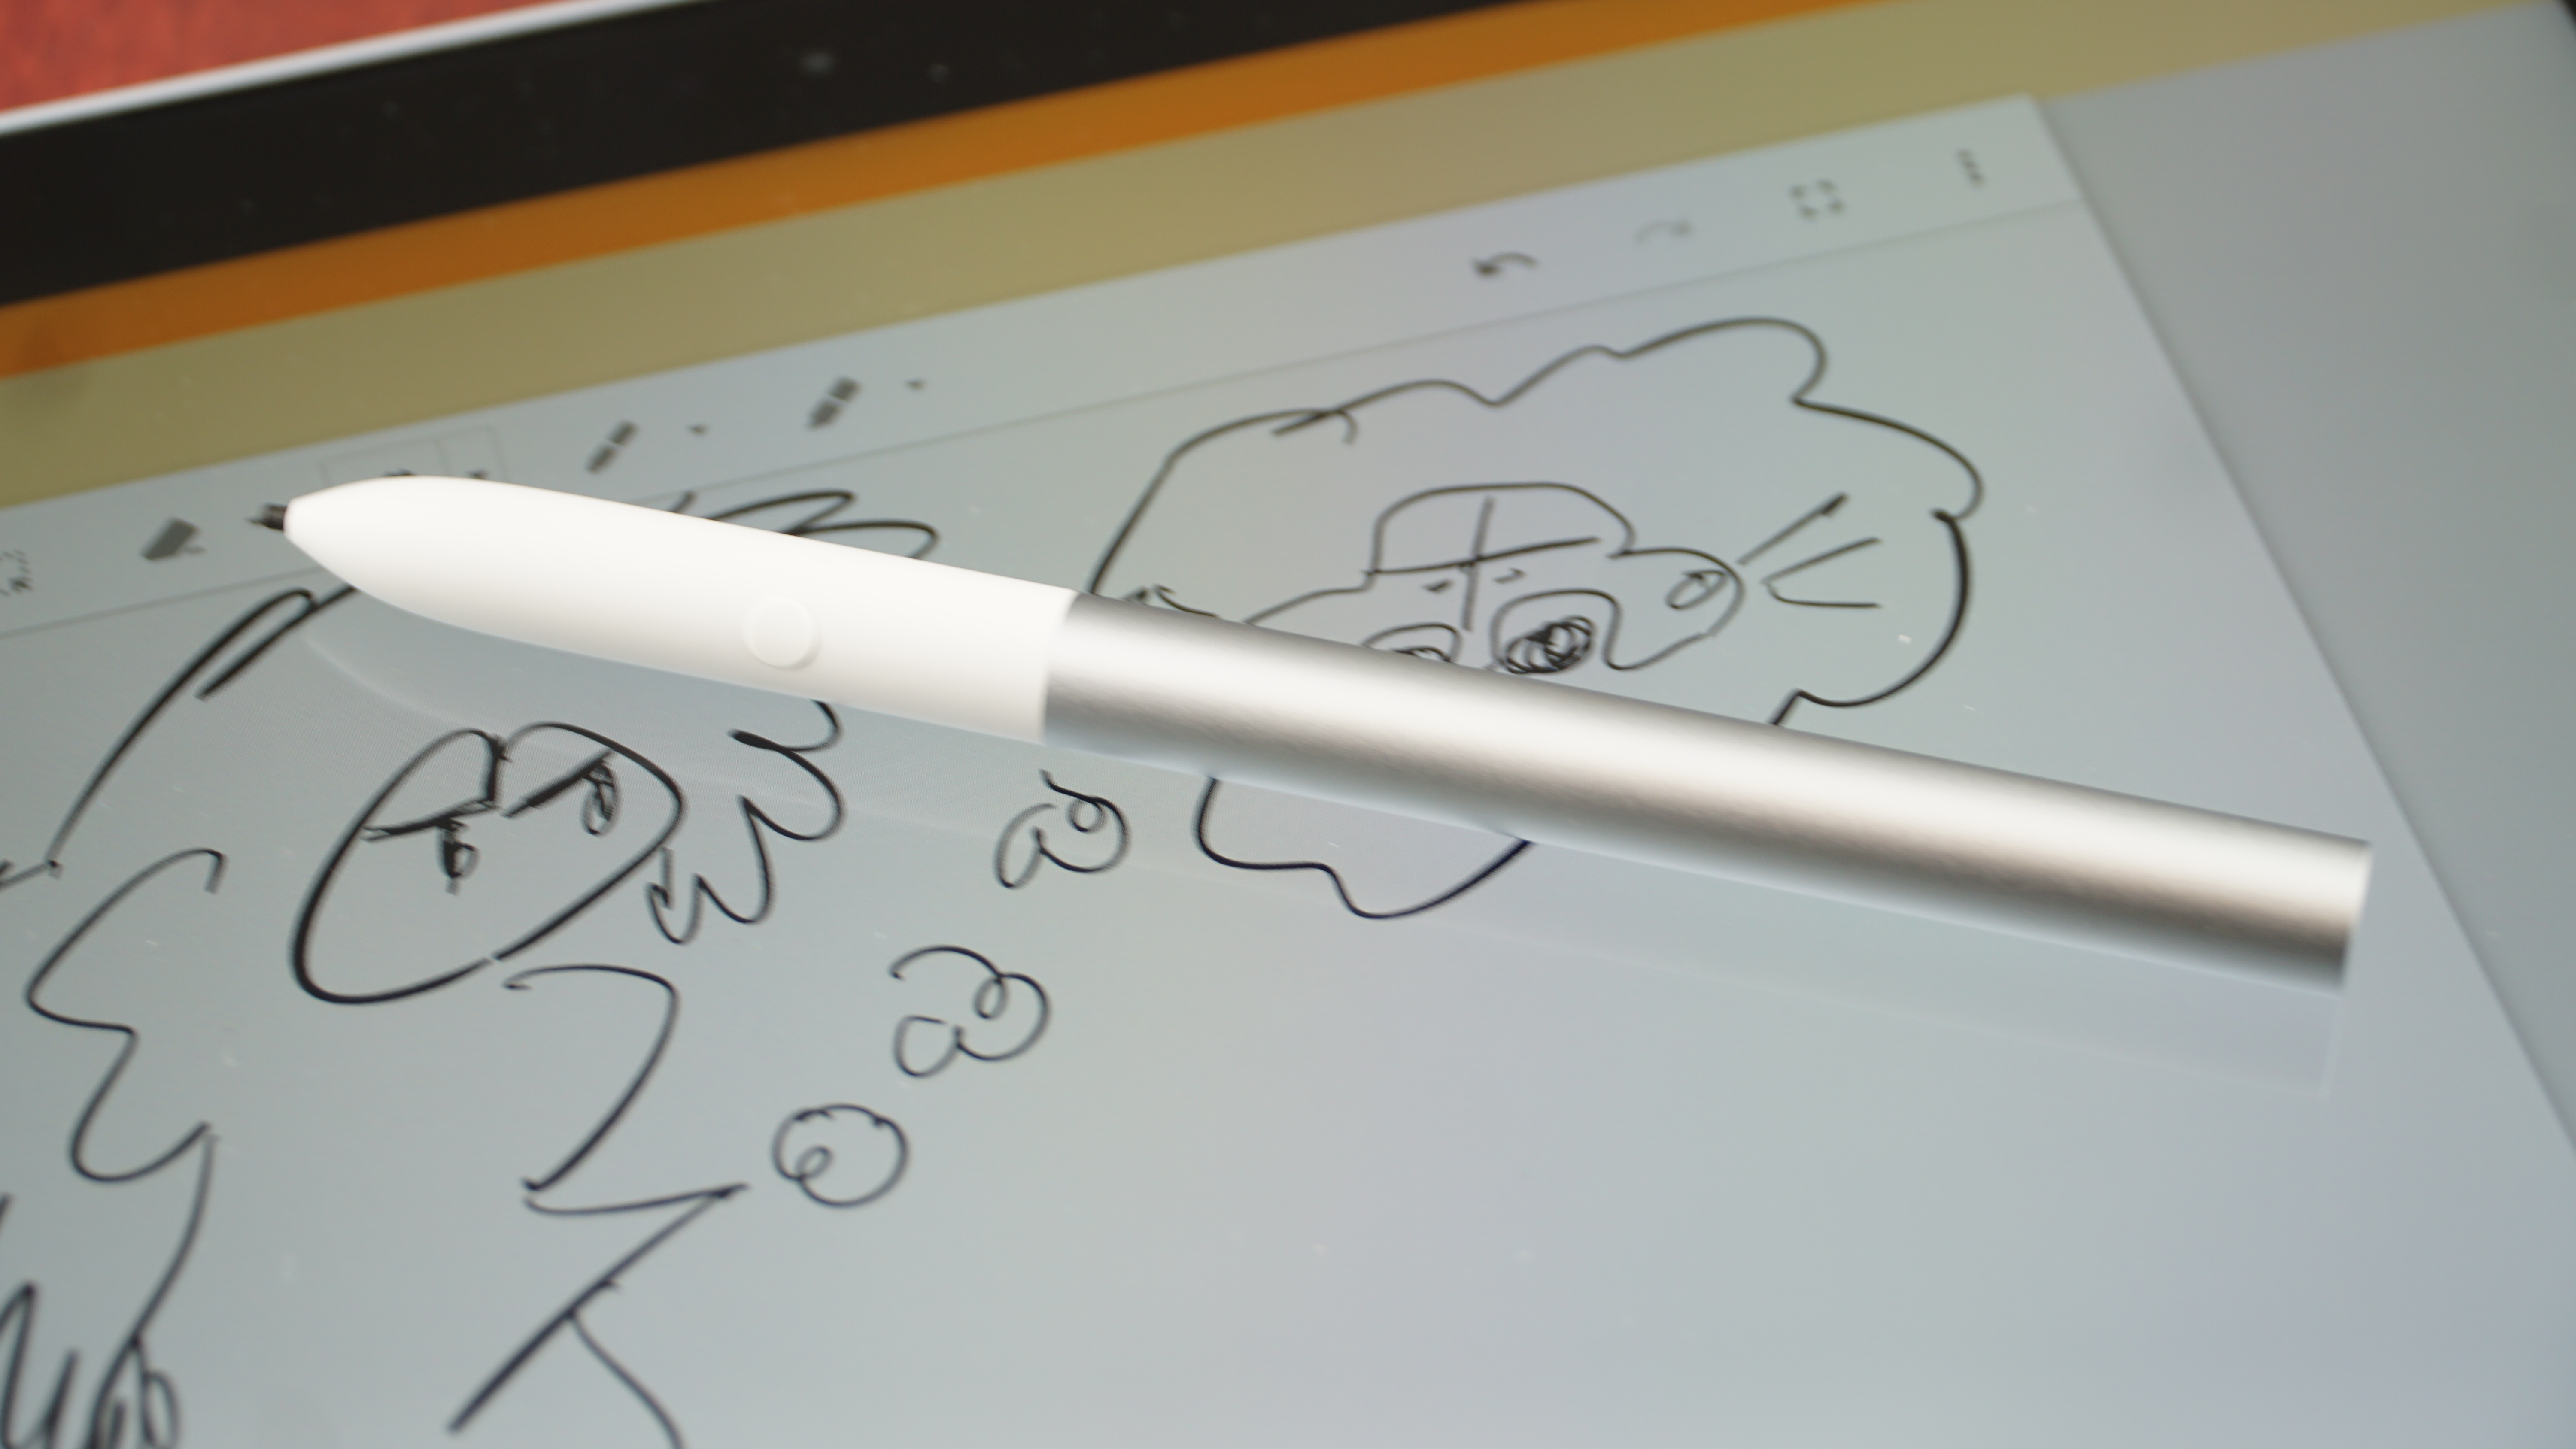 The previous stylus was not stow-able, sadly.